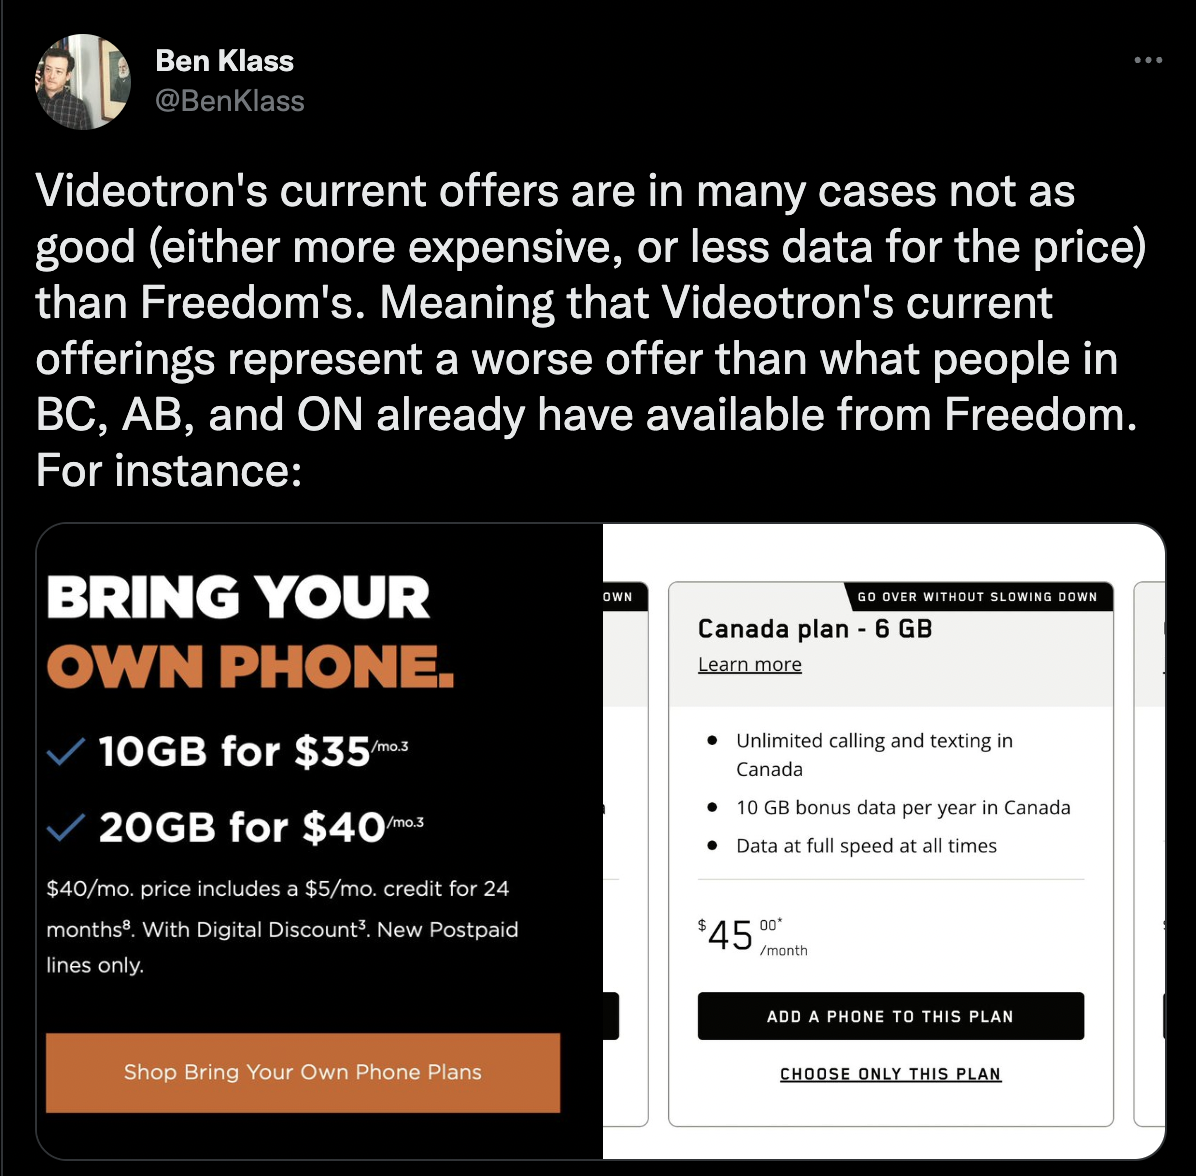 Tweet by @BenKlass reading: Videotron's current offers are in many cases not as good (either more expensive, or less data for the price) than Freedom's. Meaning that Videotron's current offerings represent a worse offer than what people in BC, AB, and ON already have available from Freedom.